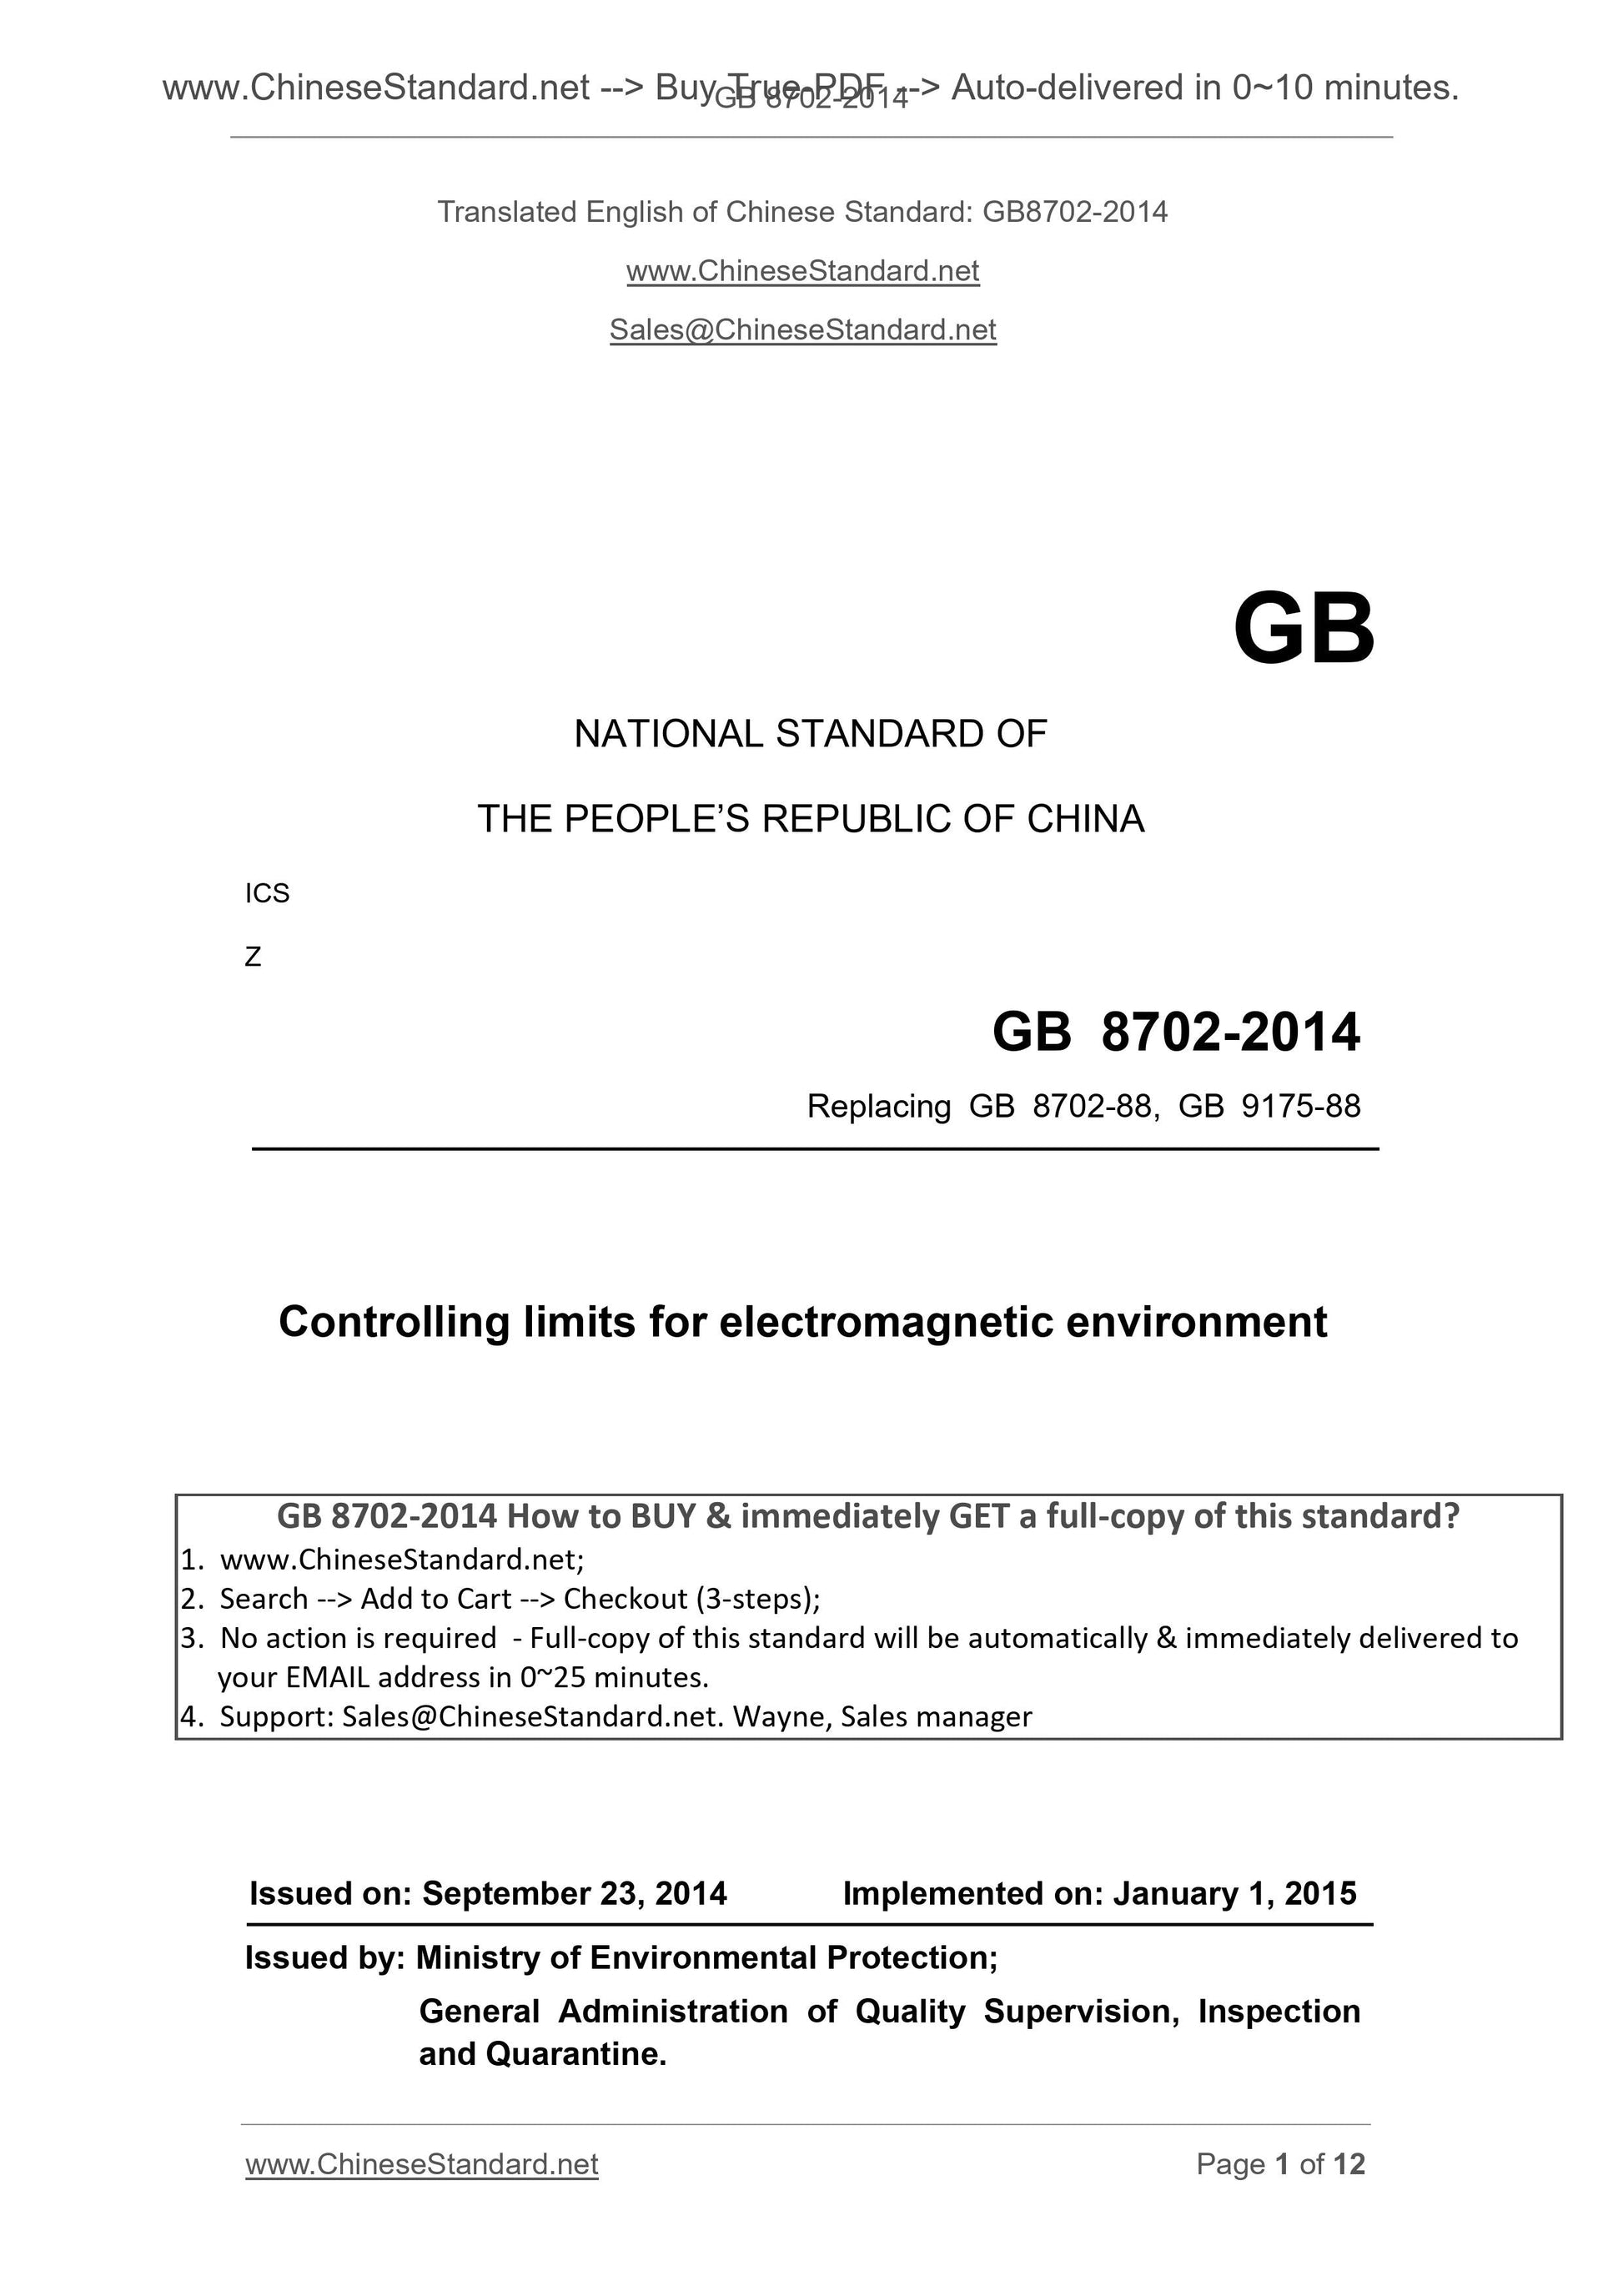 GB 8702-2014 Page 1